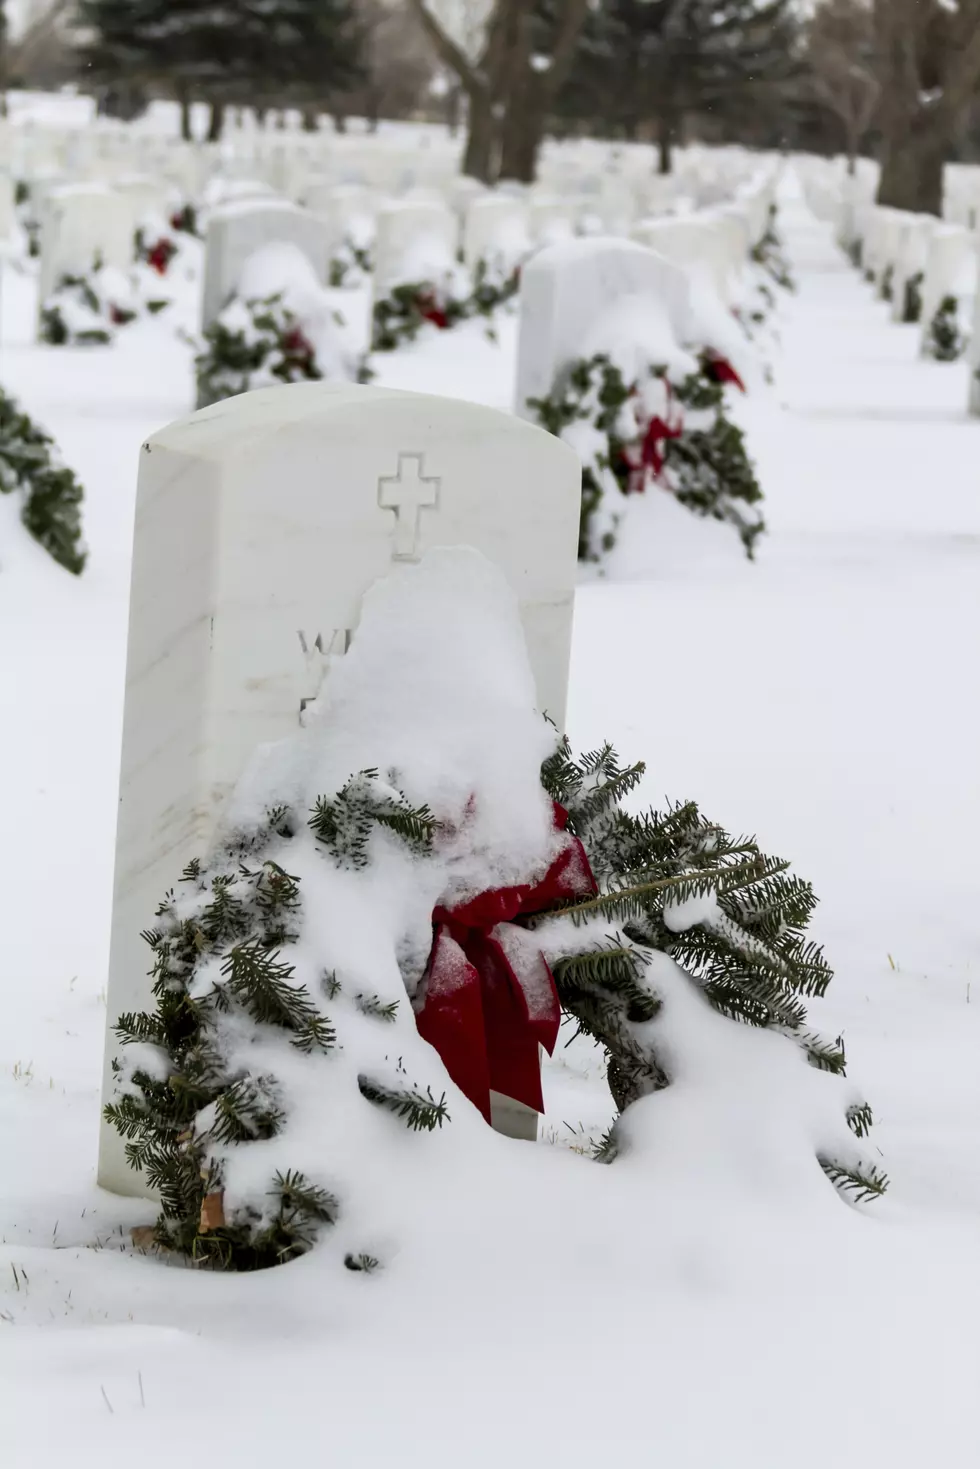 Wreaths Across America Convoy Coming To Kennebunk